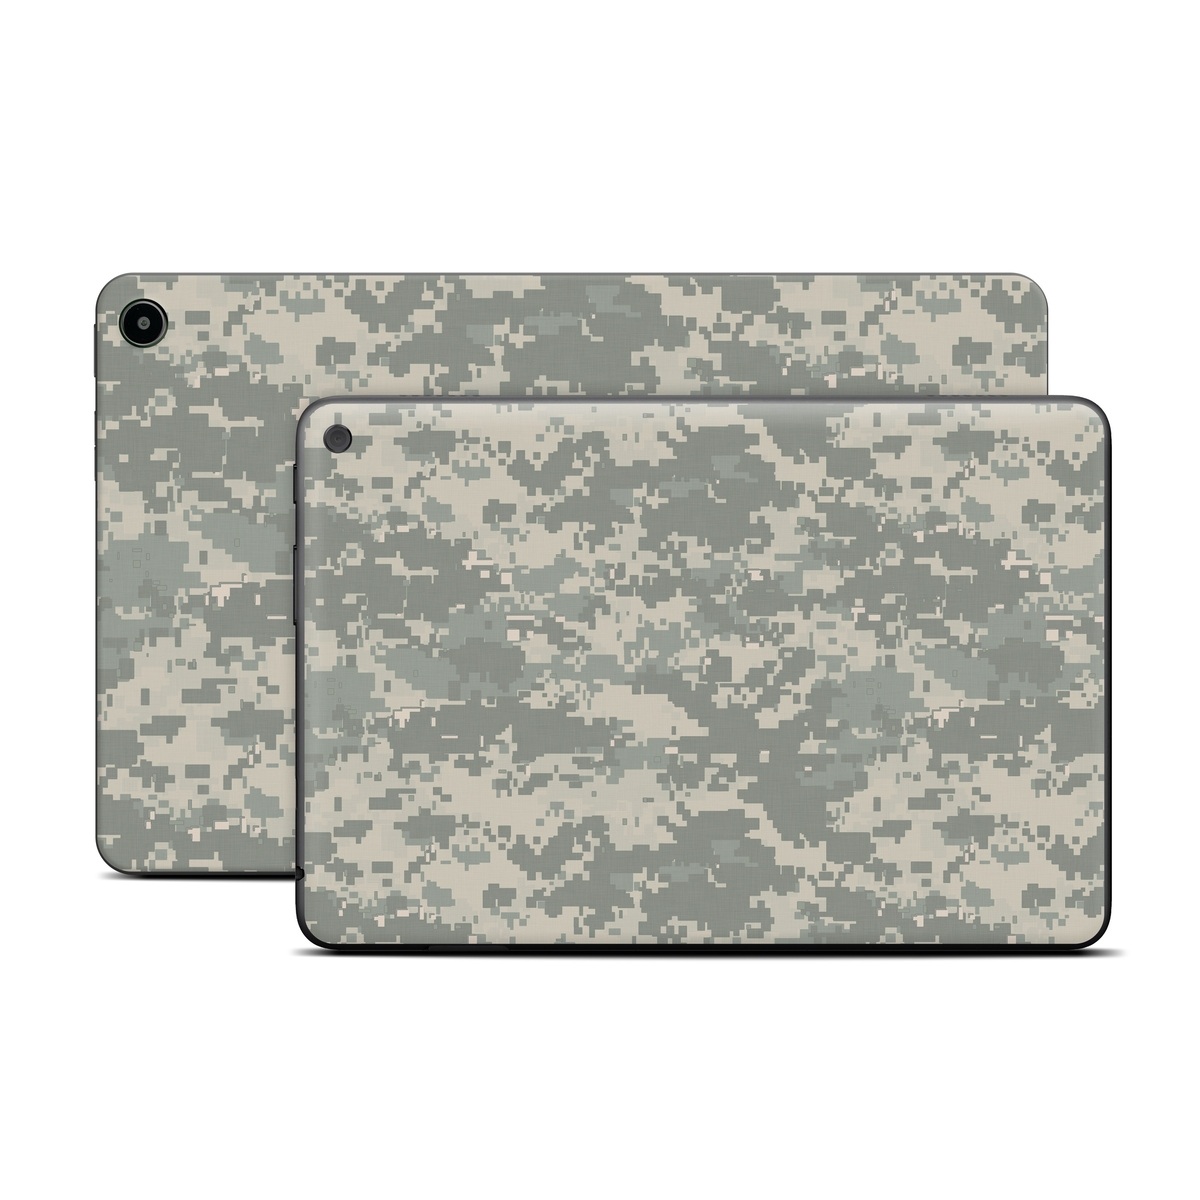  Skin design of Military camouflage, Green, Pattern, Uniform, Camouflage, Design, Wallpaper, with gray, green colors